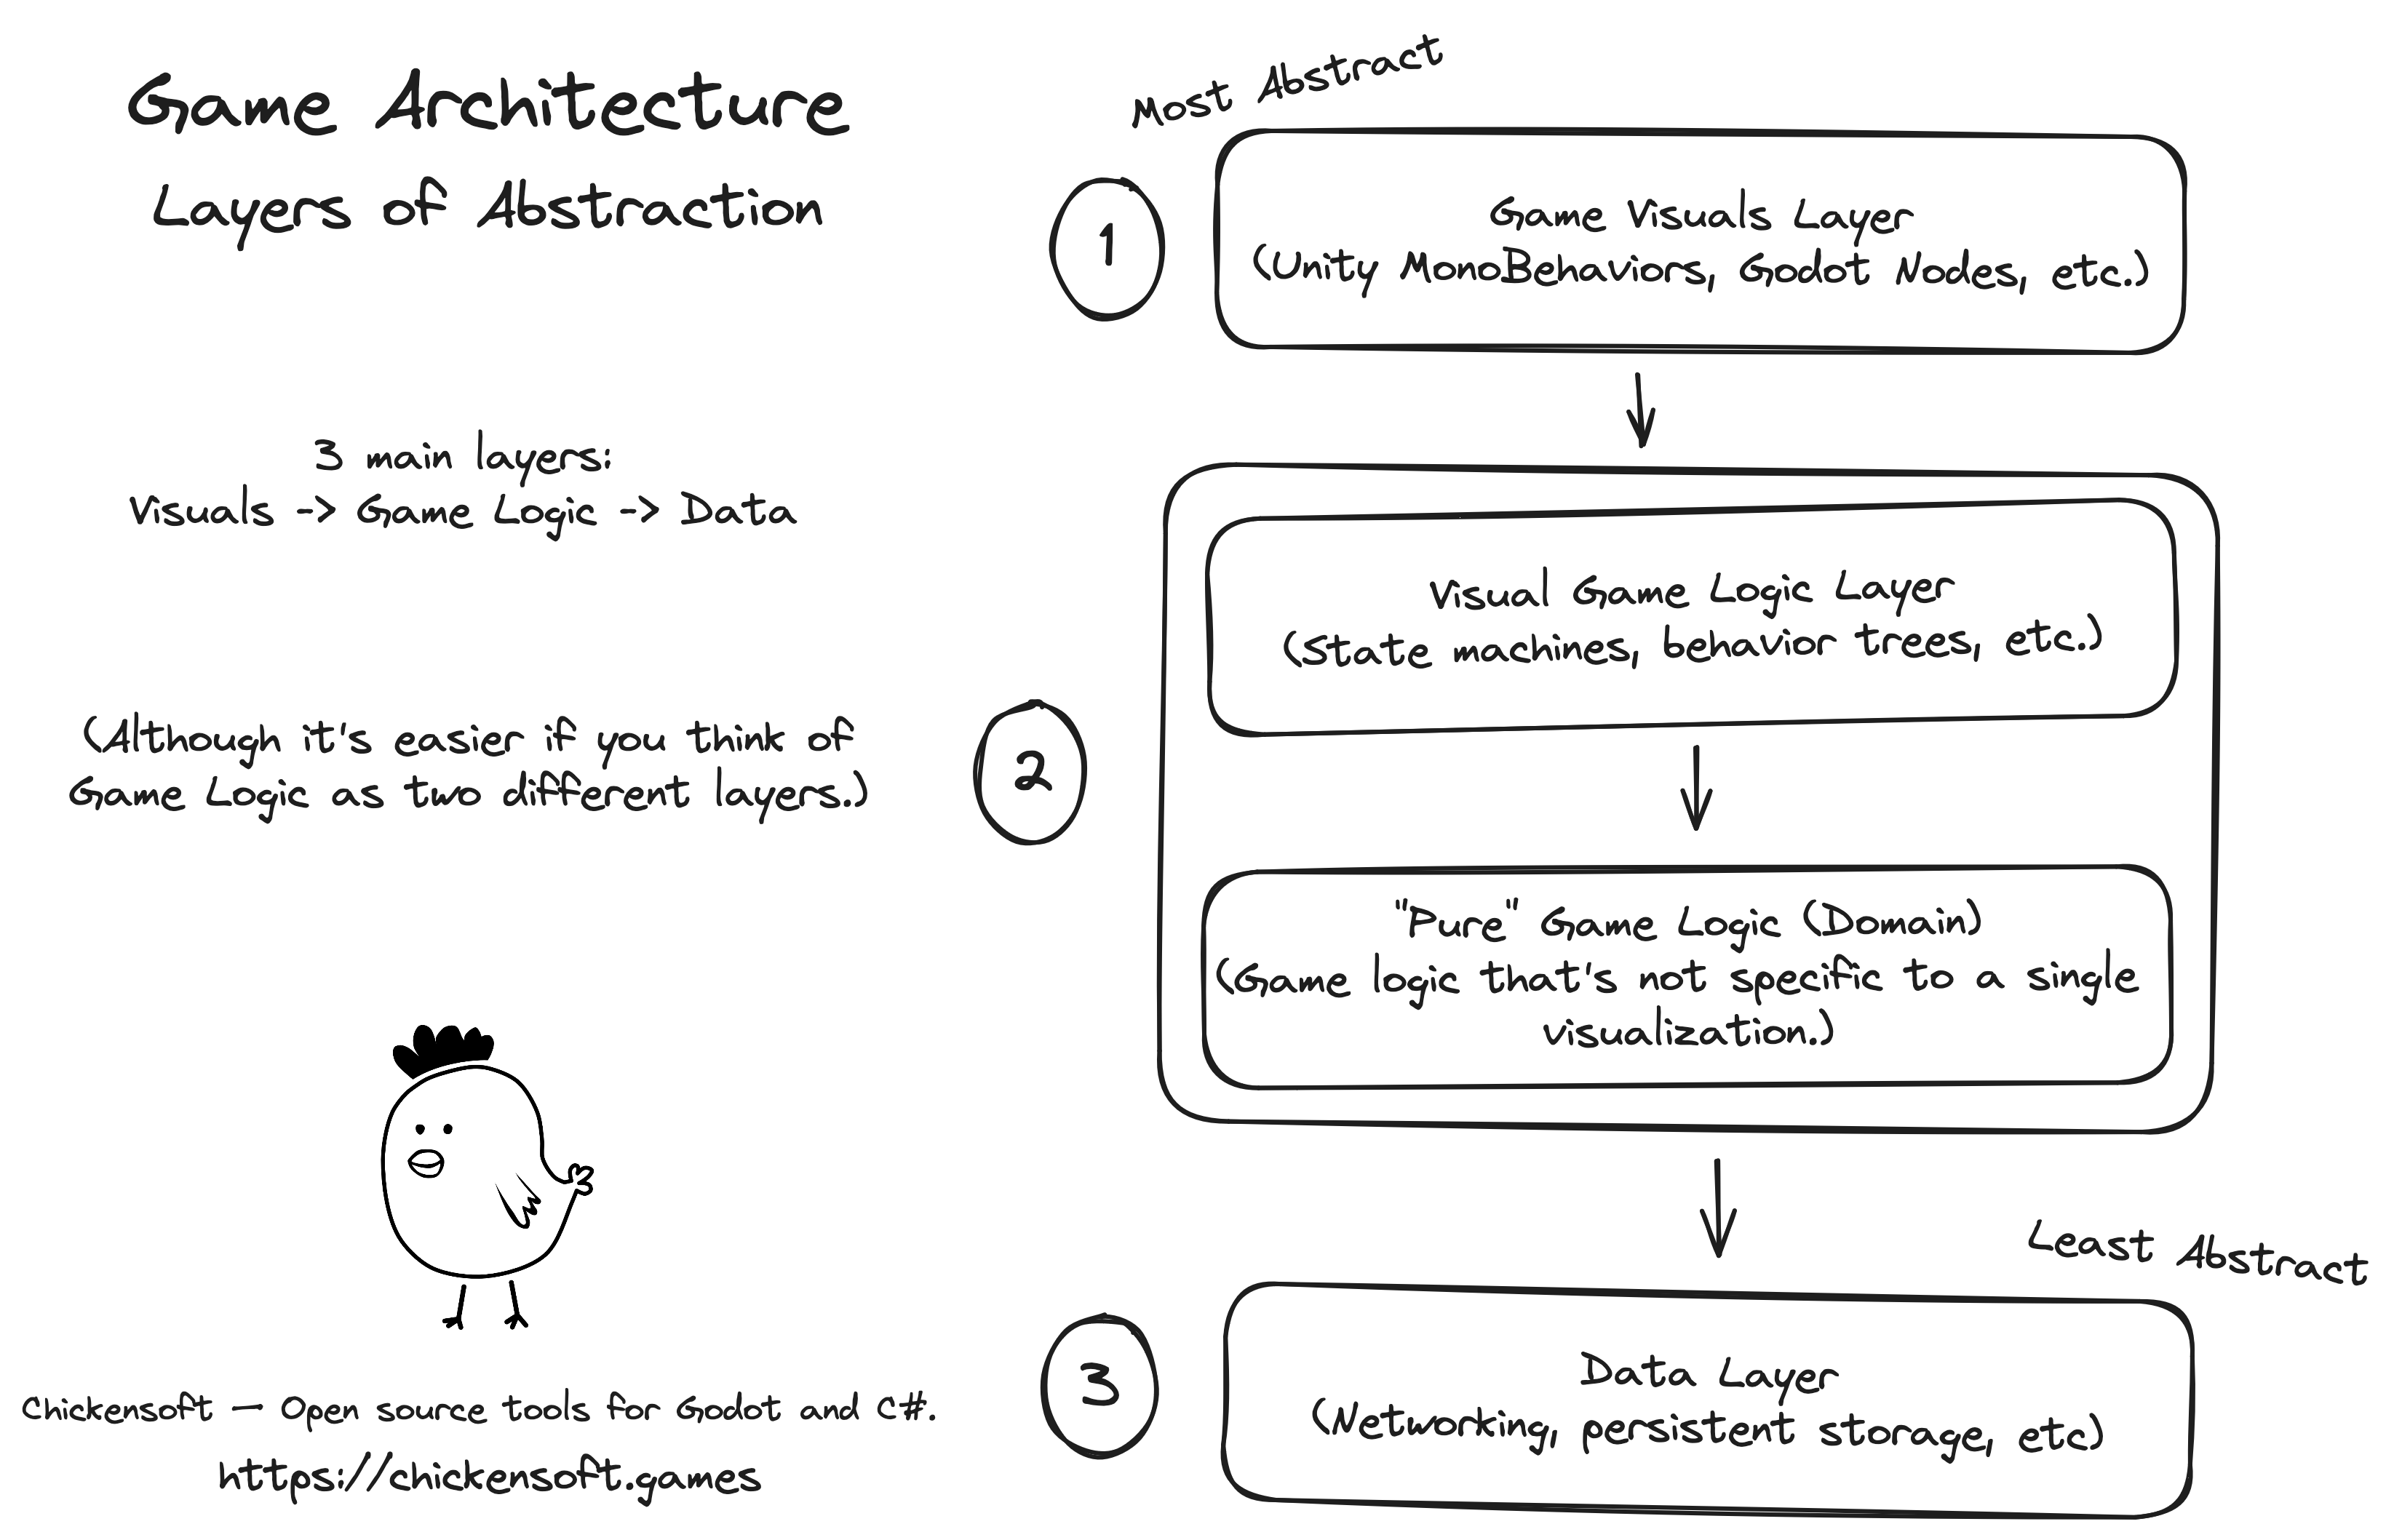 Game Architecture Layers of Abstraction